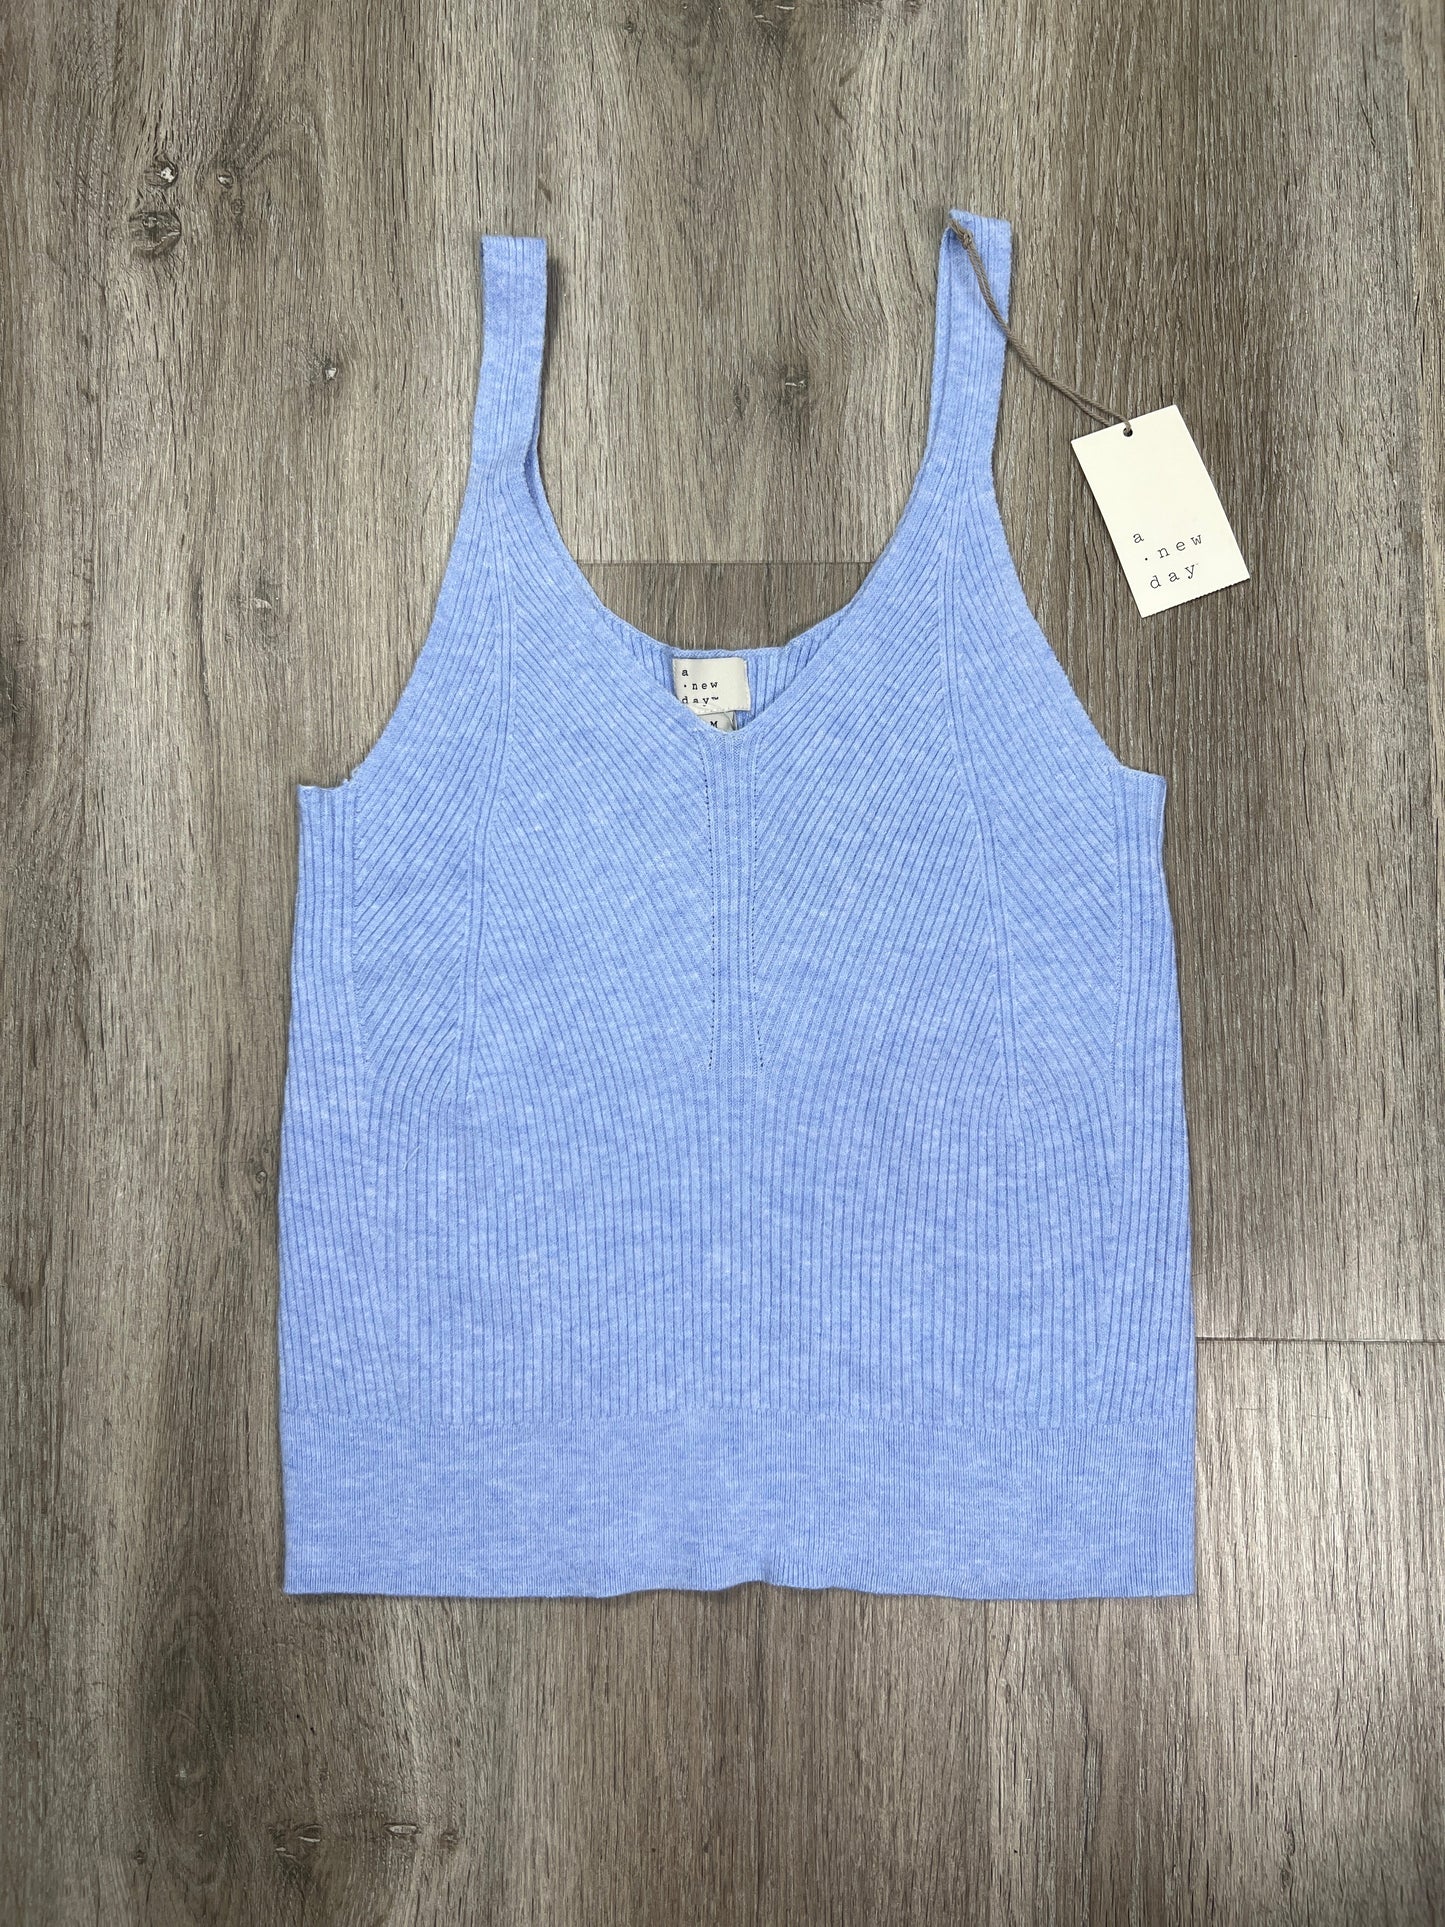 Blue Top Sleeveless A New Day, Size M